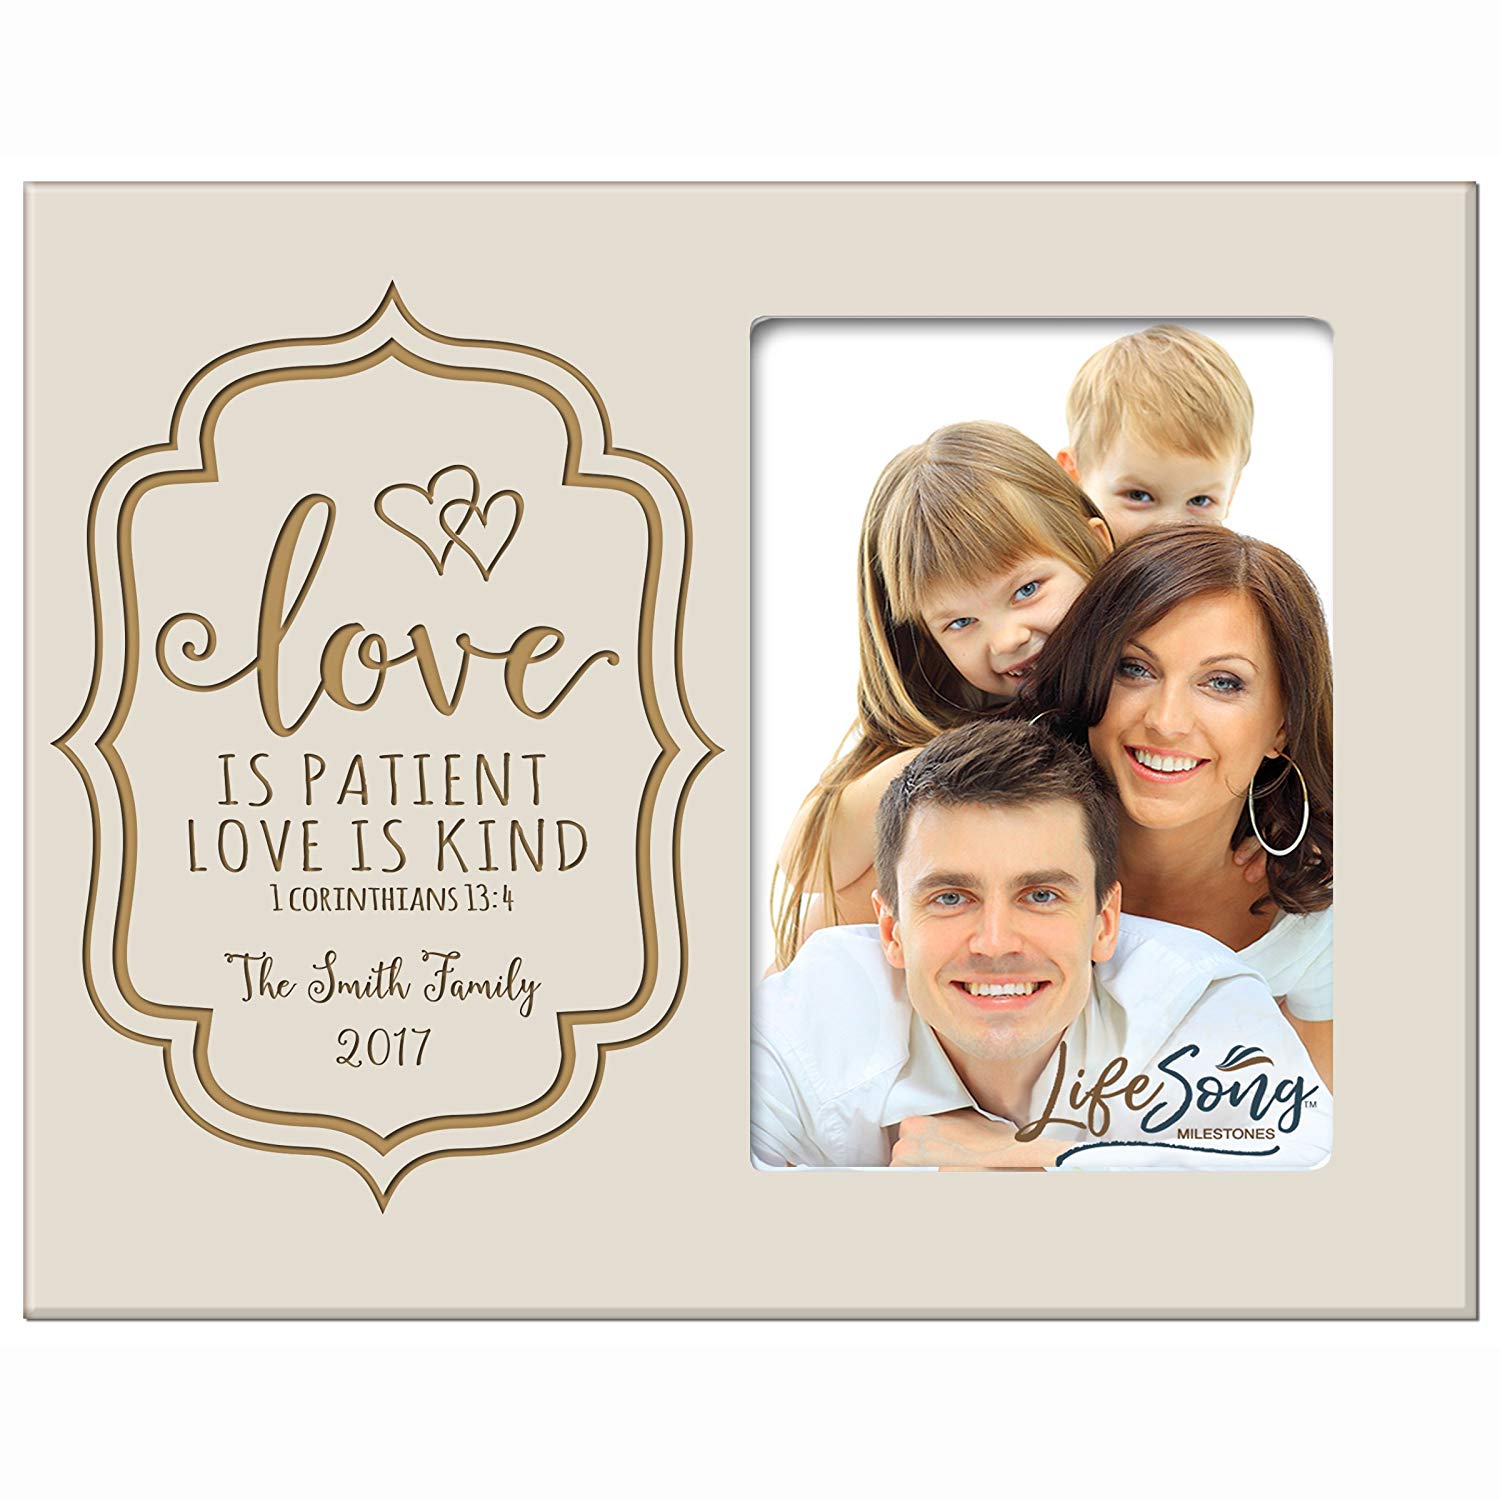 Personalized Valentine's Day Photo Frame - Love Is Patient - LifeSong Milestones